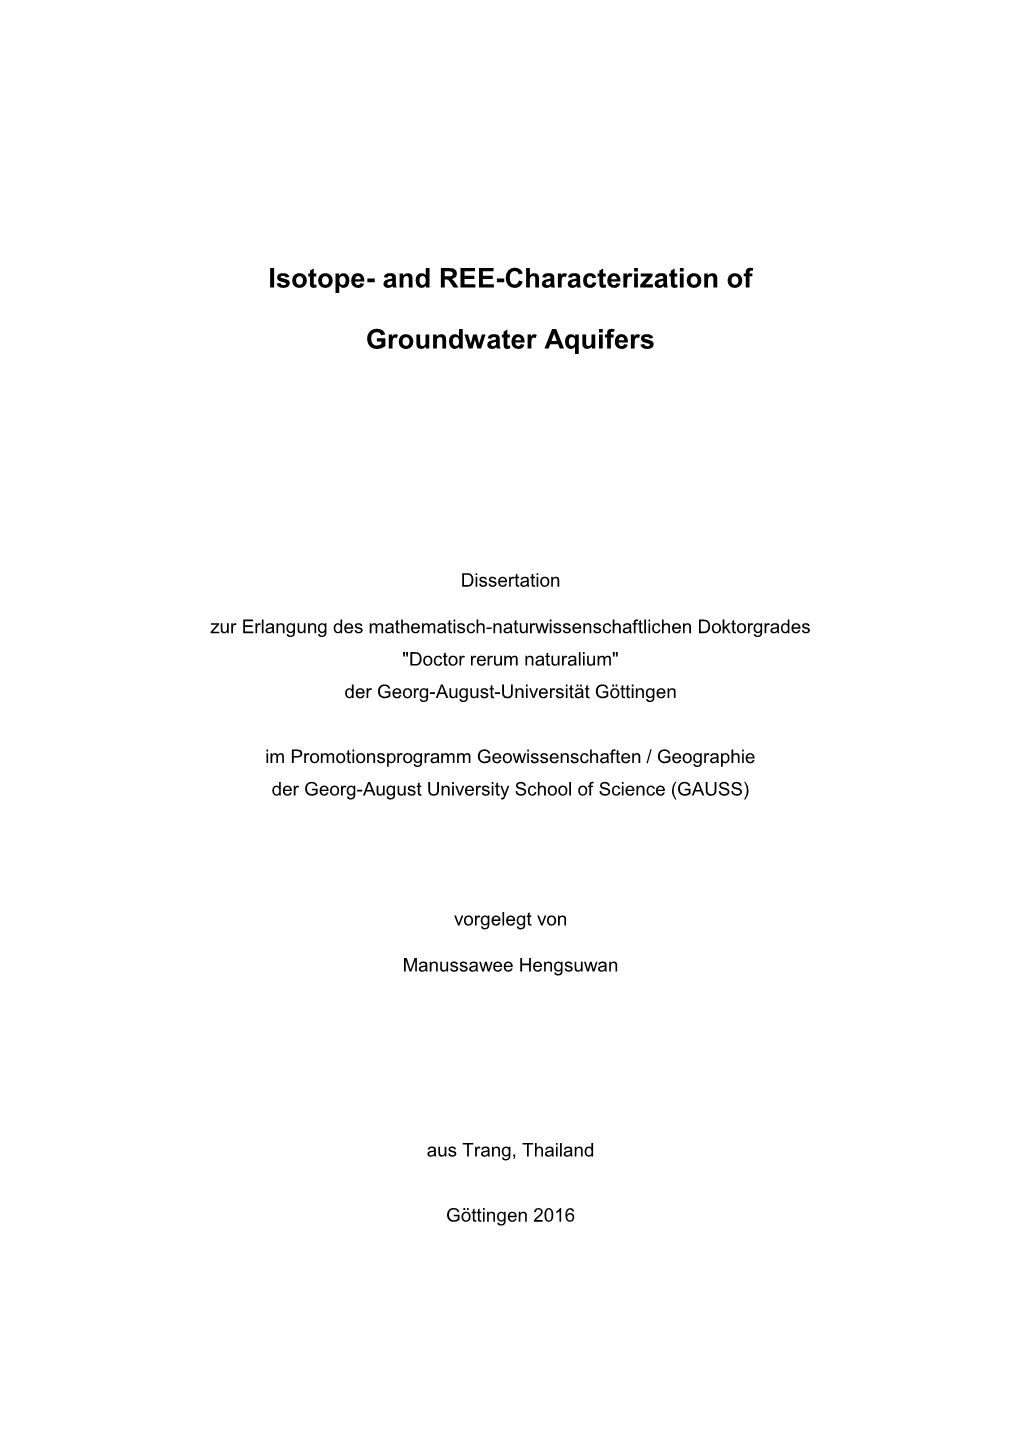 Isotope- and REE-Characterization of Groundwater Aquifers Within the Aquifer Storage and Recovery Programme in Sukhothai (N.-Thailand)